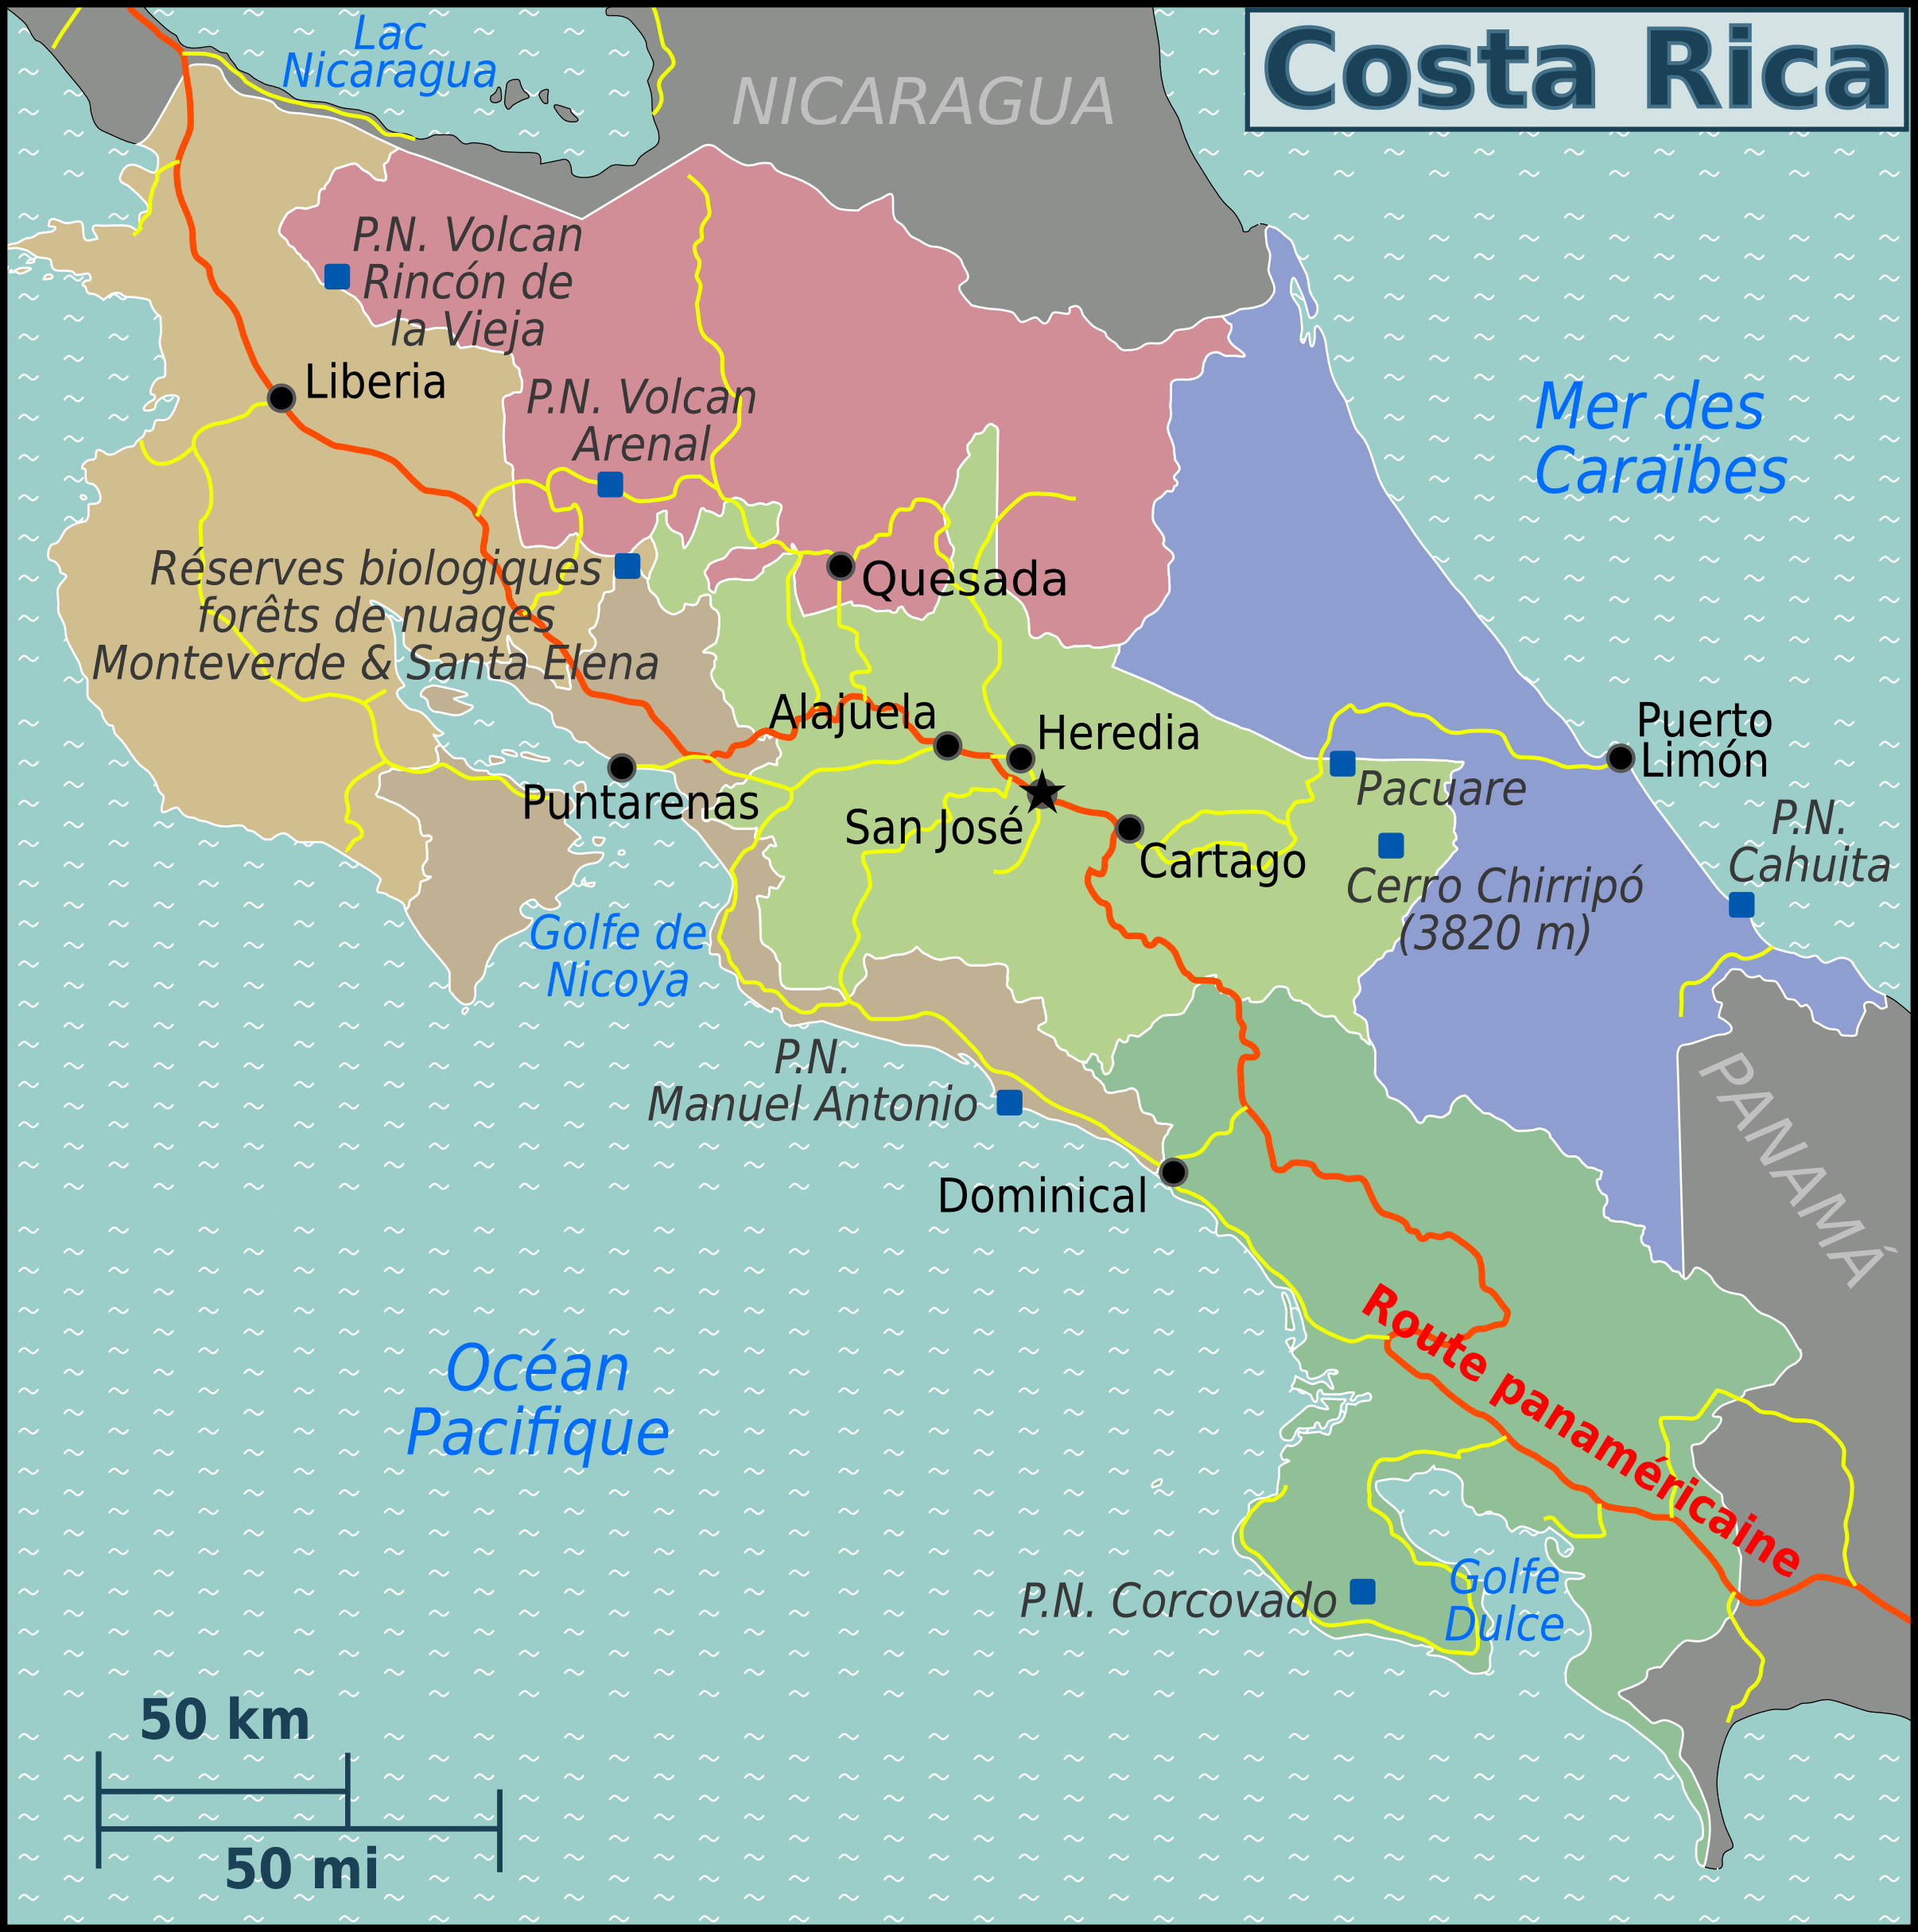 File:Costa Rica regions map (fr).png - Wikimedia Commons